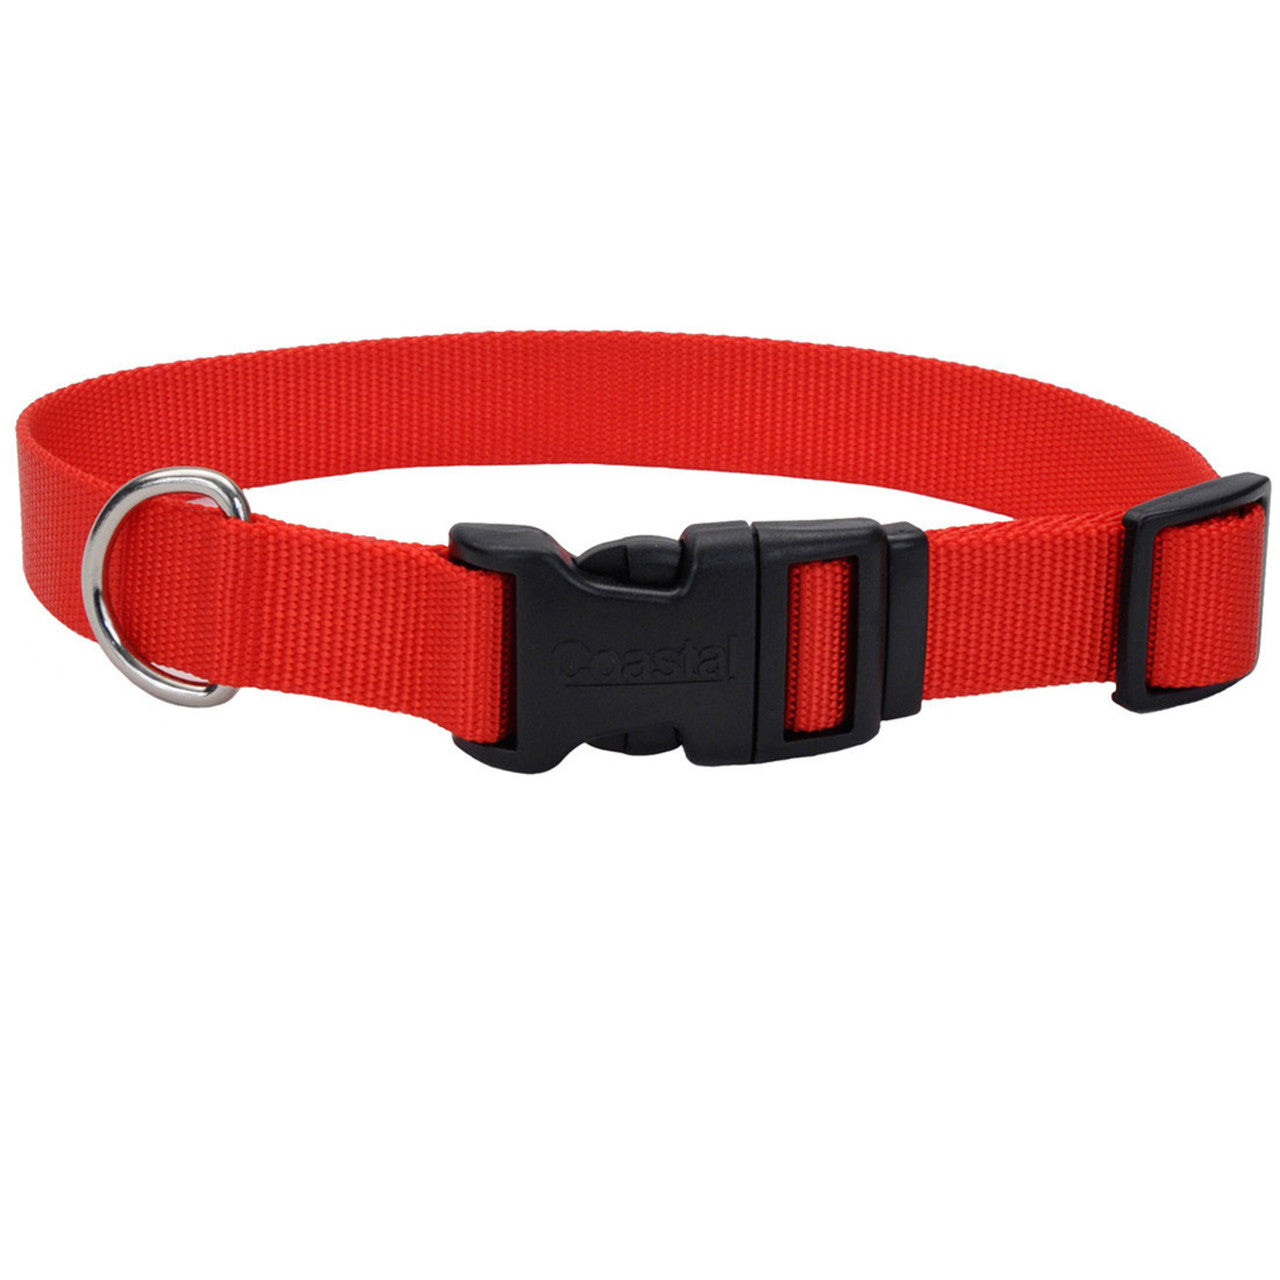 Coastal Adjustable Nylon Dog Collar with Plastic Buckle Red 3/4 in x 14-20 in